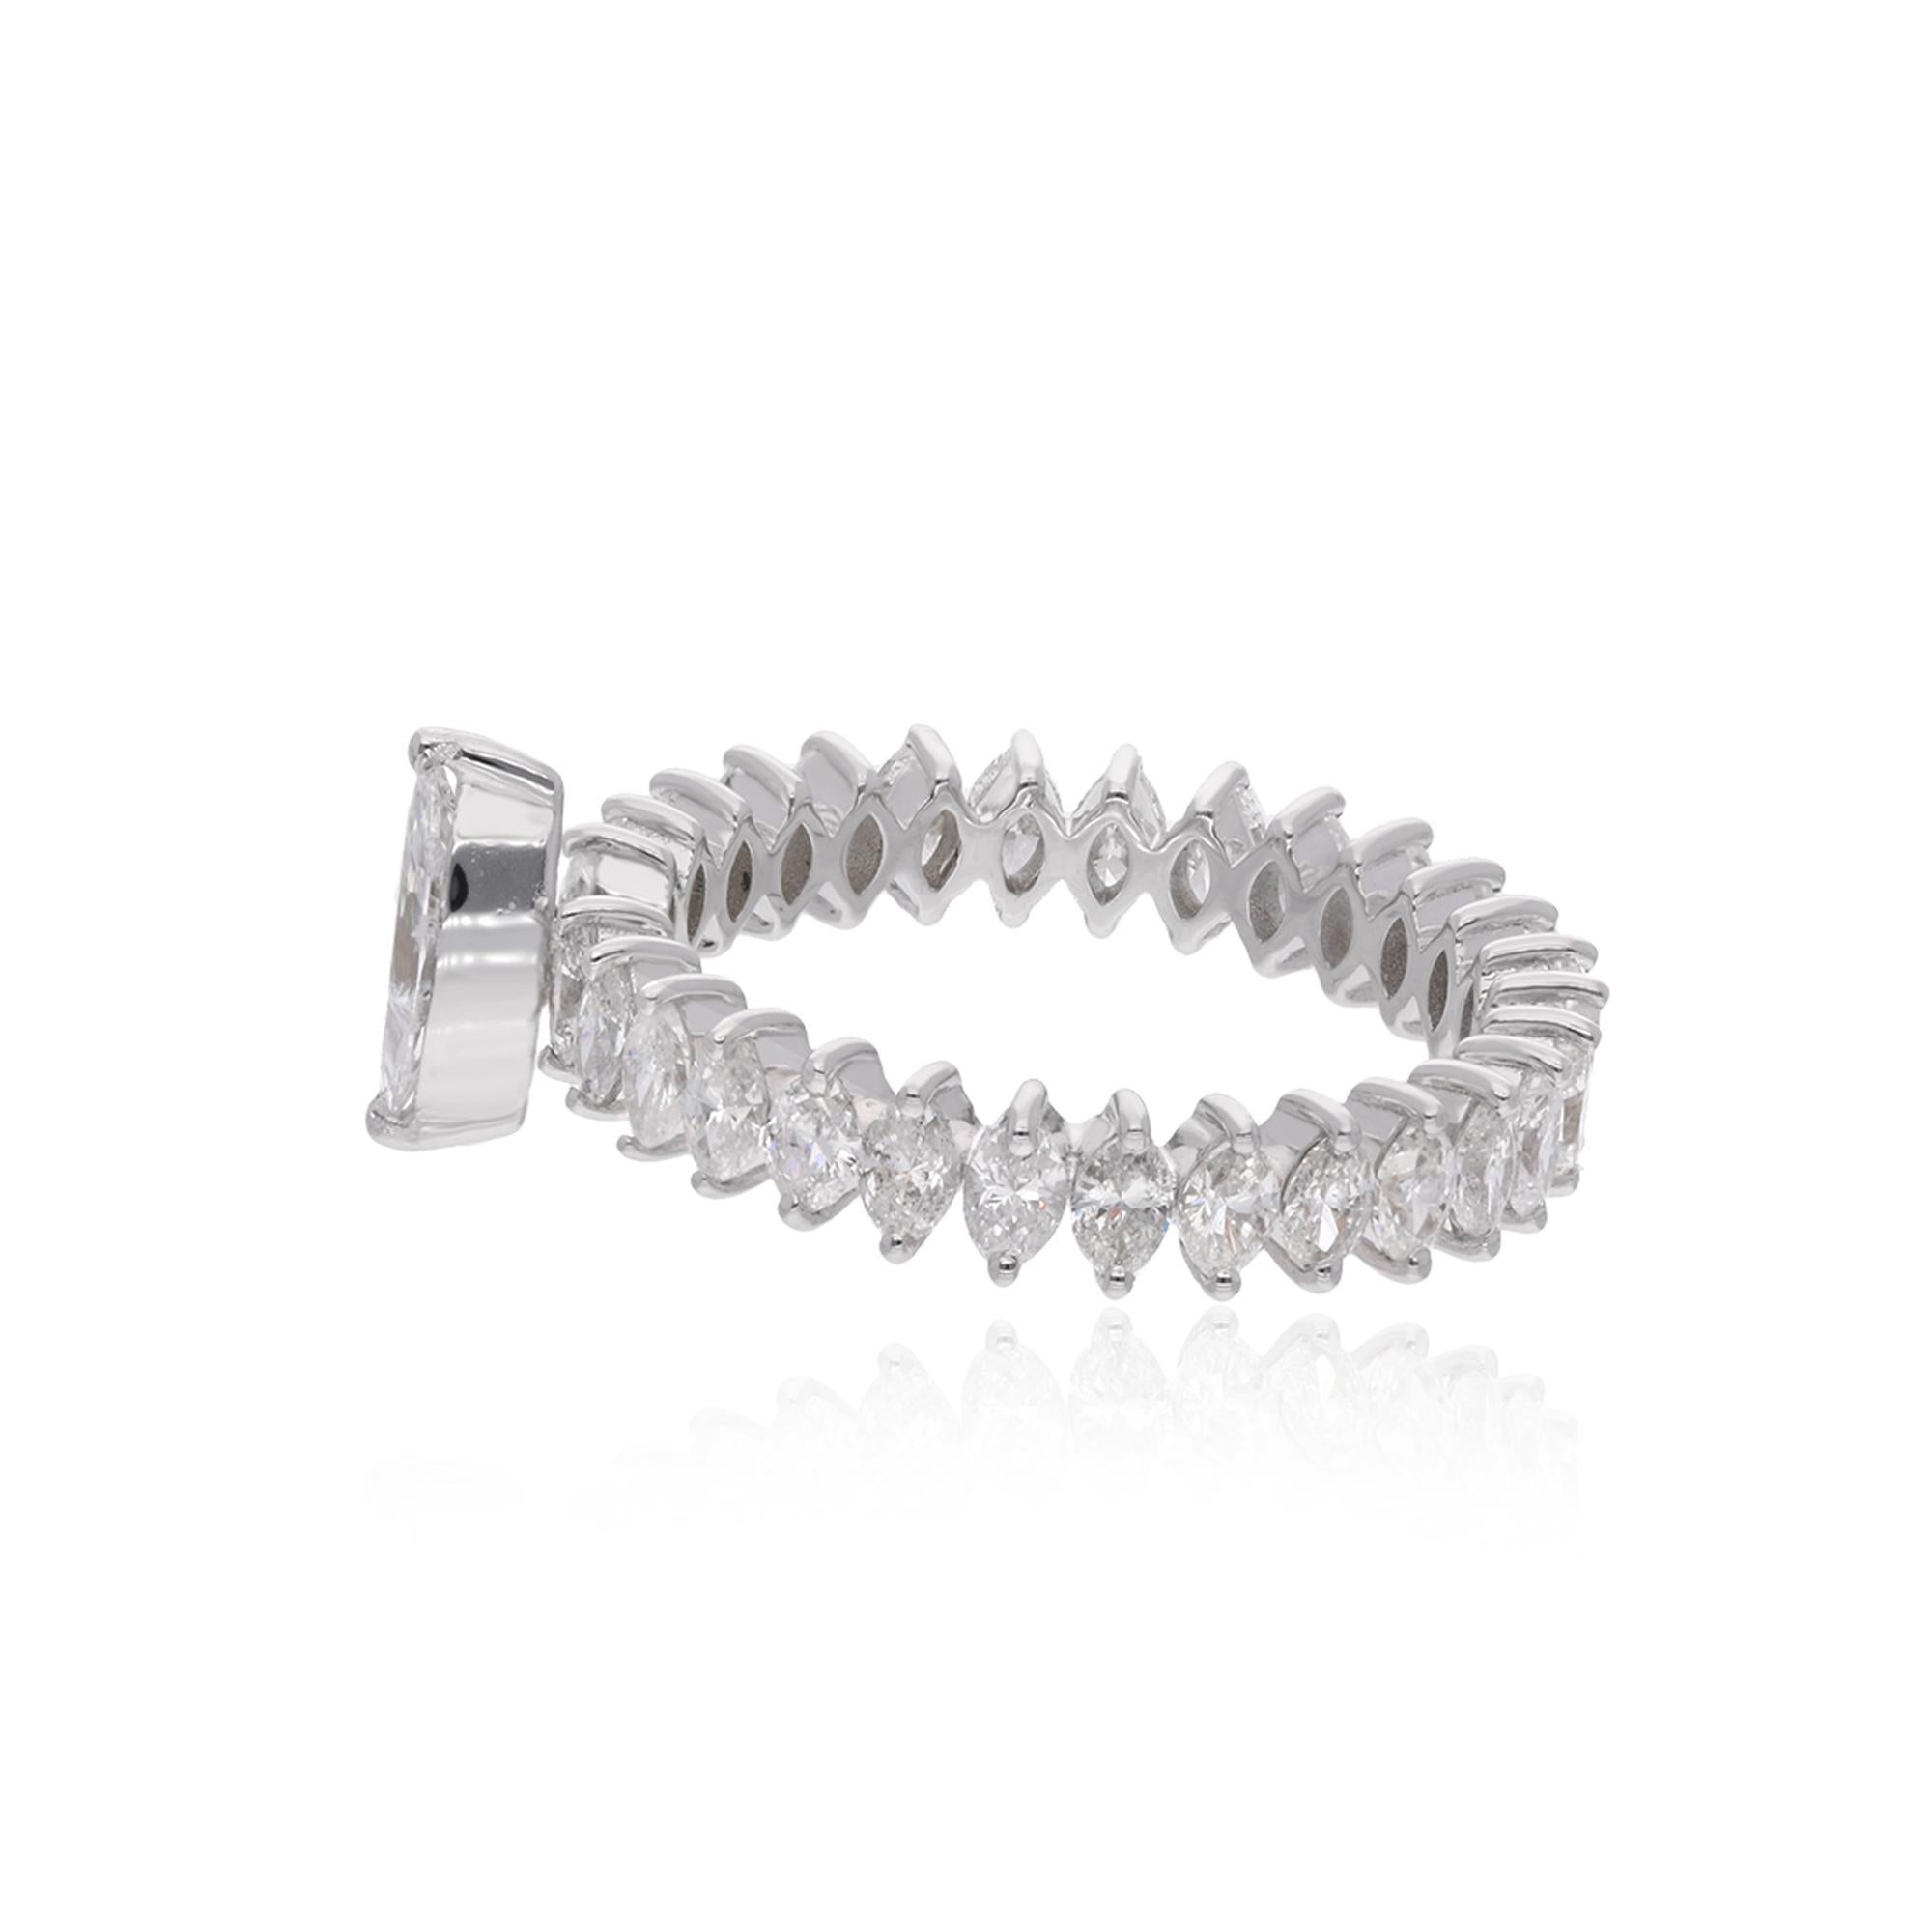 Our exquisite Full Eternity Diamond Band is a true symbol of everlasting love and timeless elegance. Handcrafted with precision and artistry, this mesmerizing ring is designed to capture the hearts of those seeking a truly remarkable piece of